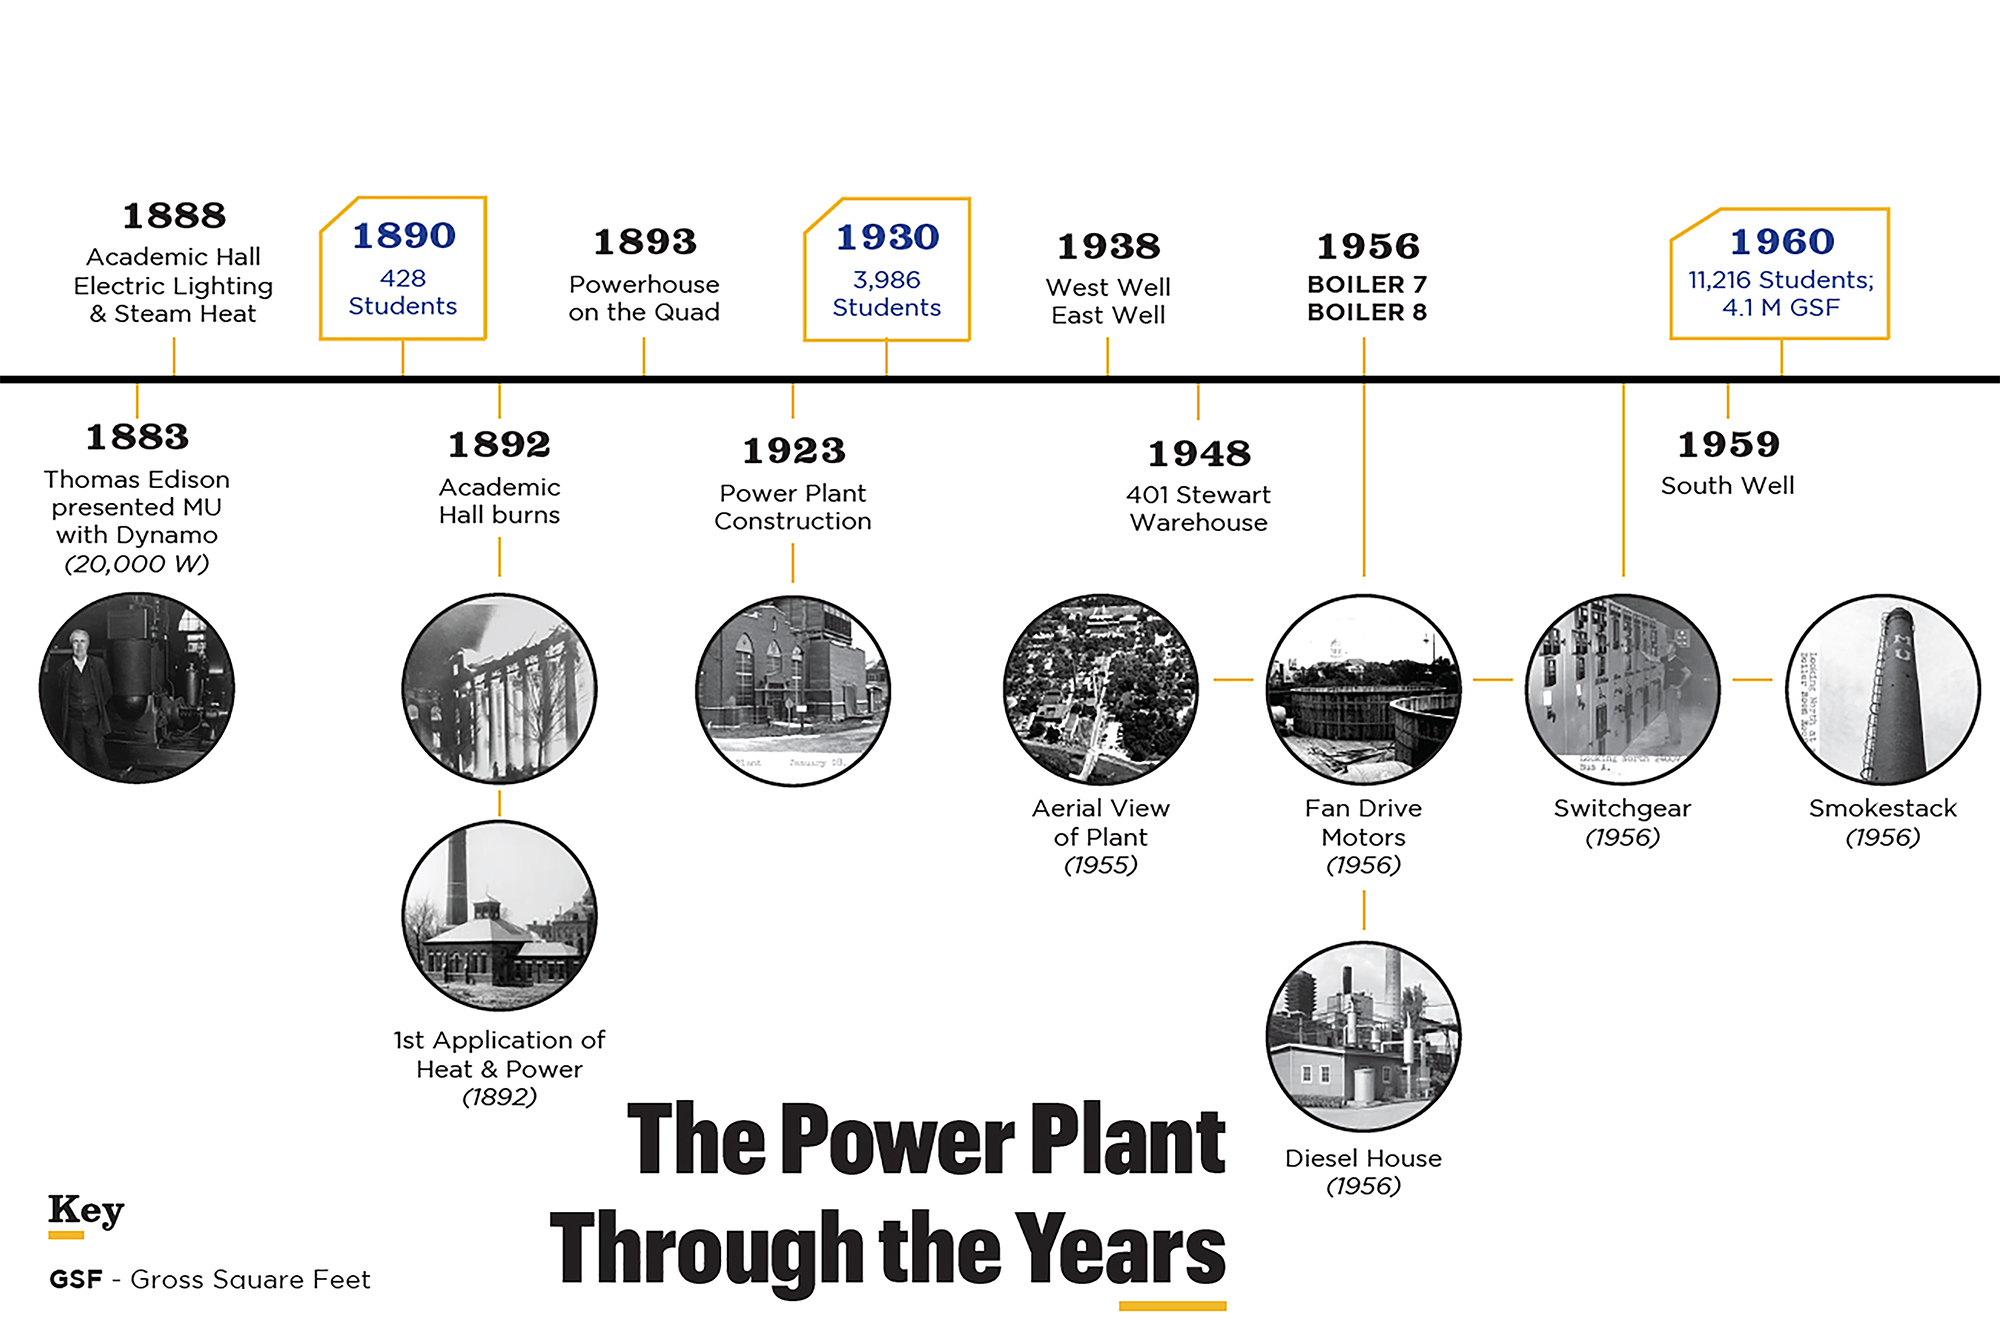 Power Plant through the years: 1883: Thomas Edison presented MU with Dynamo 1888: Academic Hall electric lighting and steam heat. 1892: Academic Hall burns, first application of heat and power. 1893: Powerhouse on the Quad 1923: Power plant construction 1930: 3,986 students 1938: West well and East well 1948: 401 Stewart warehouse 1956: boiler 7 and boiler 8 1959: South well 1960: 11,216 students, 4.1 million gross square feet